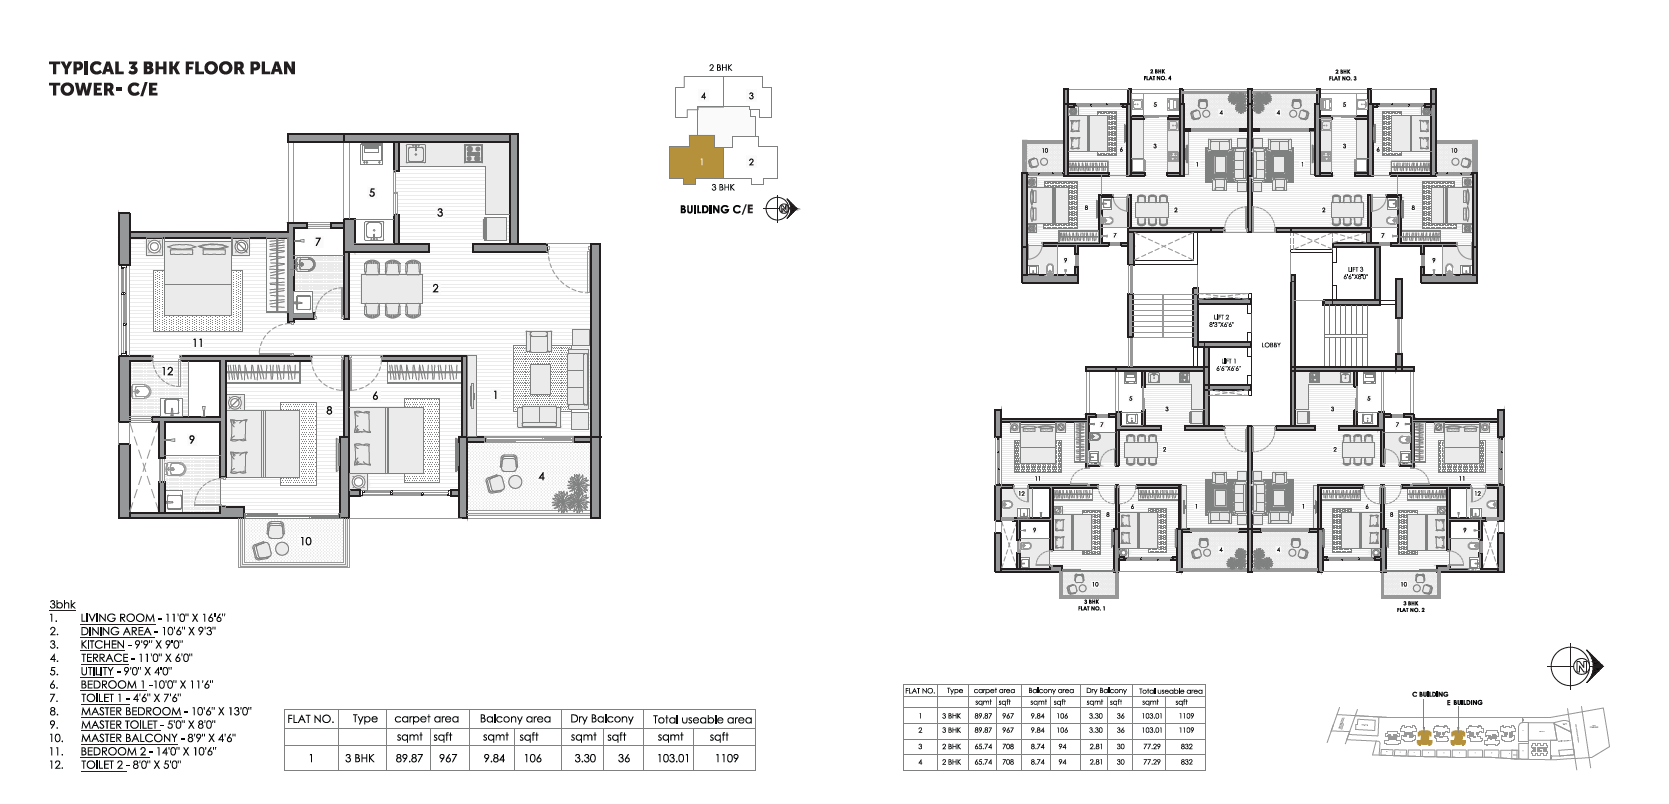 kunal the canary 3 bhk floor plan tower C-e